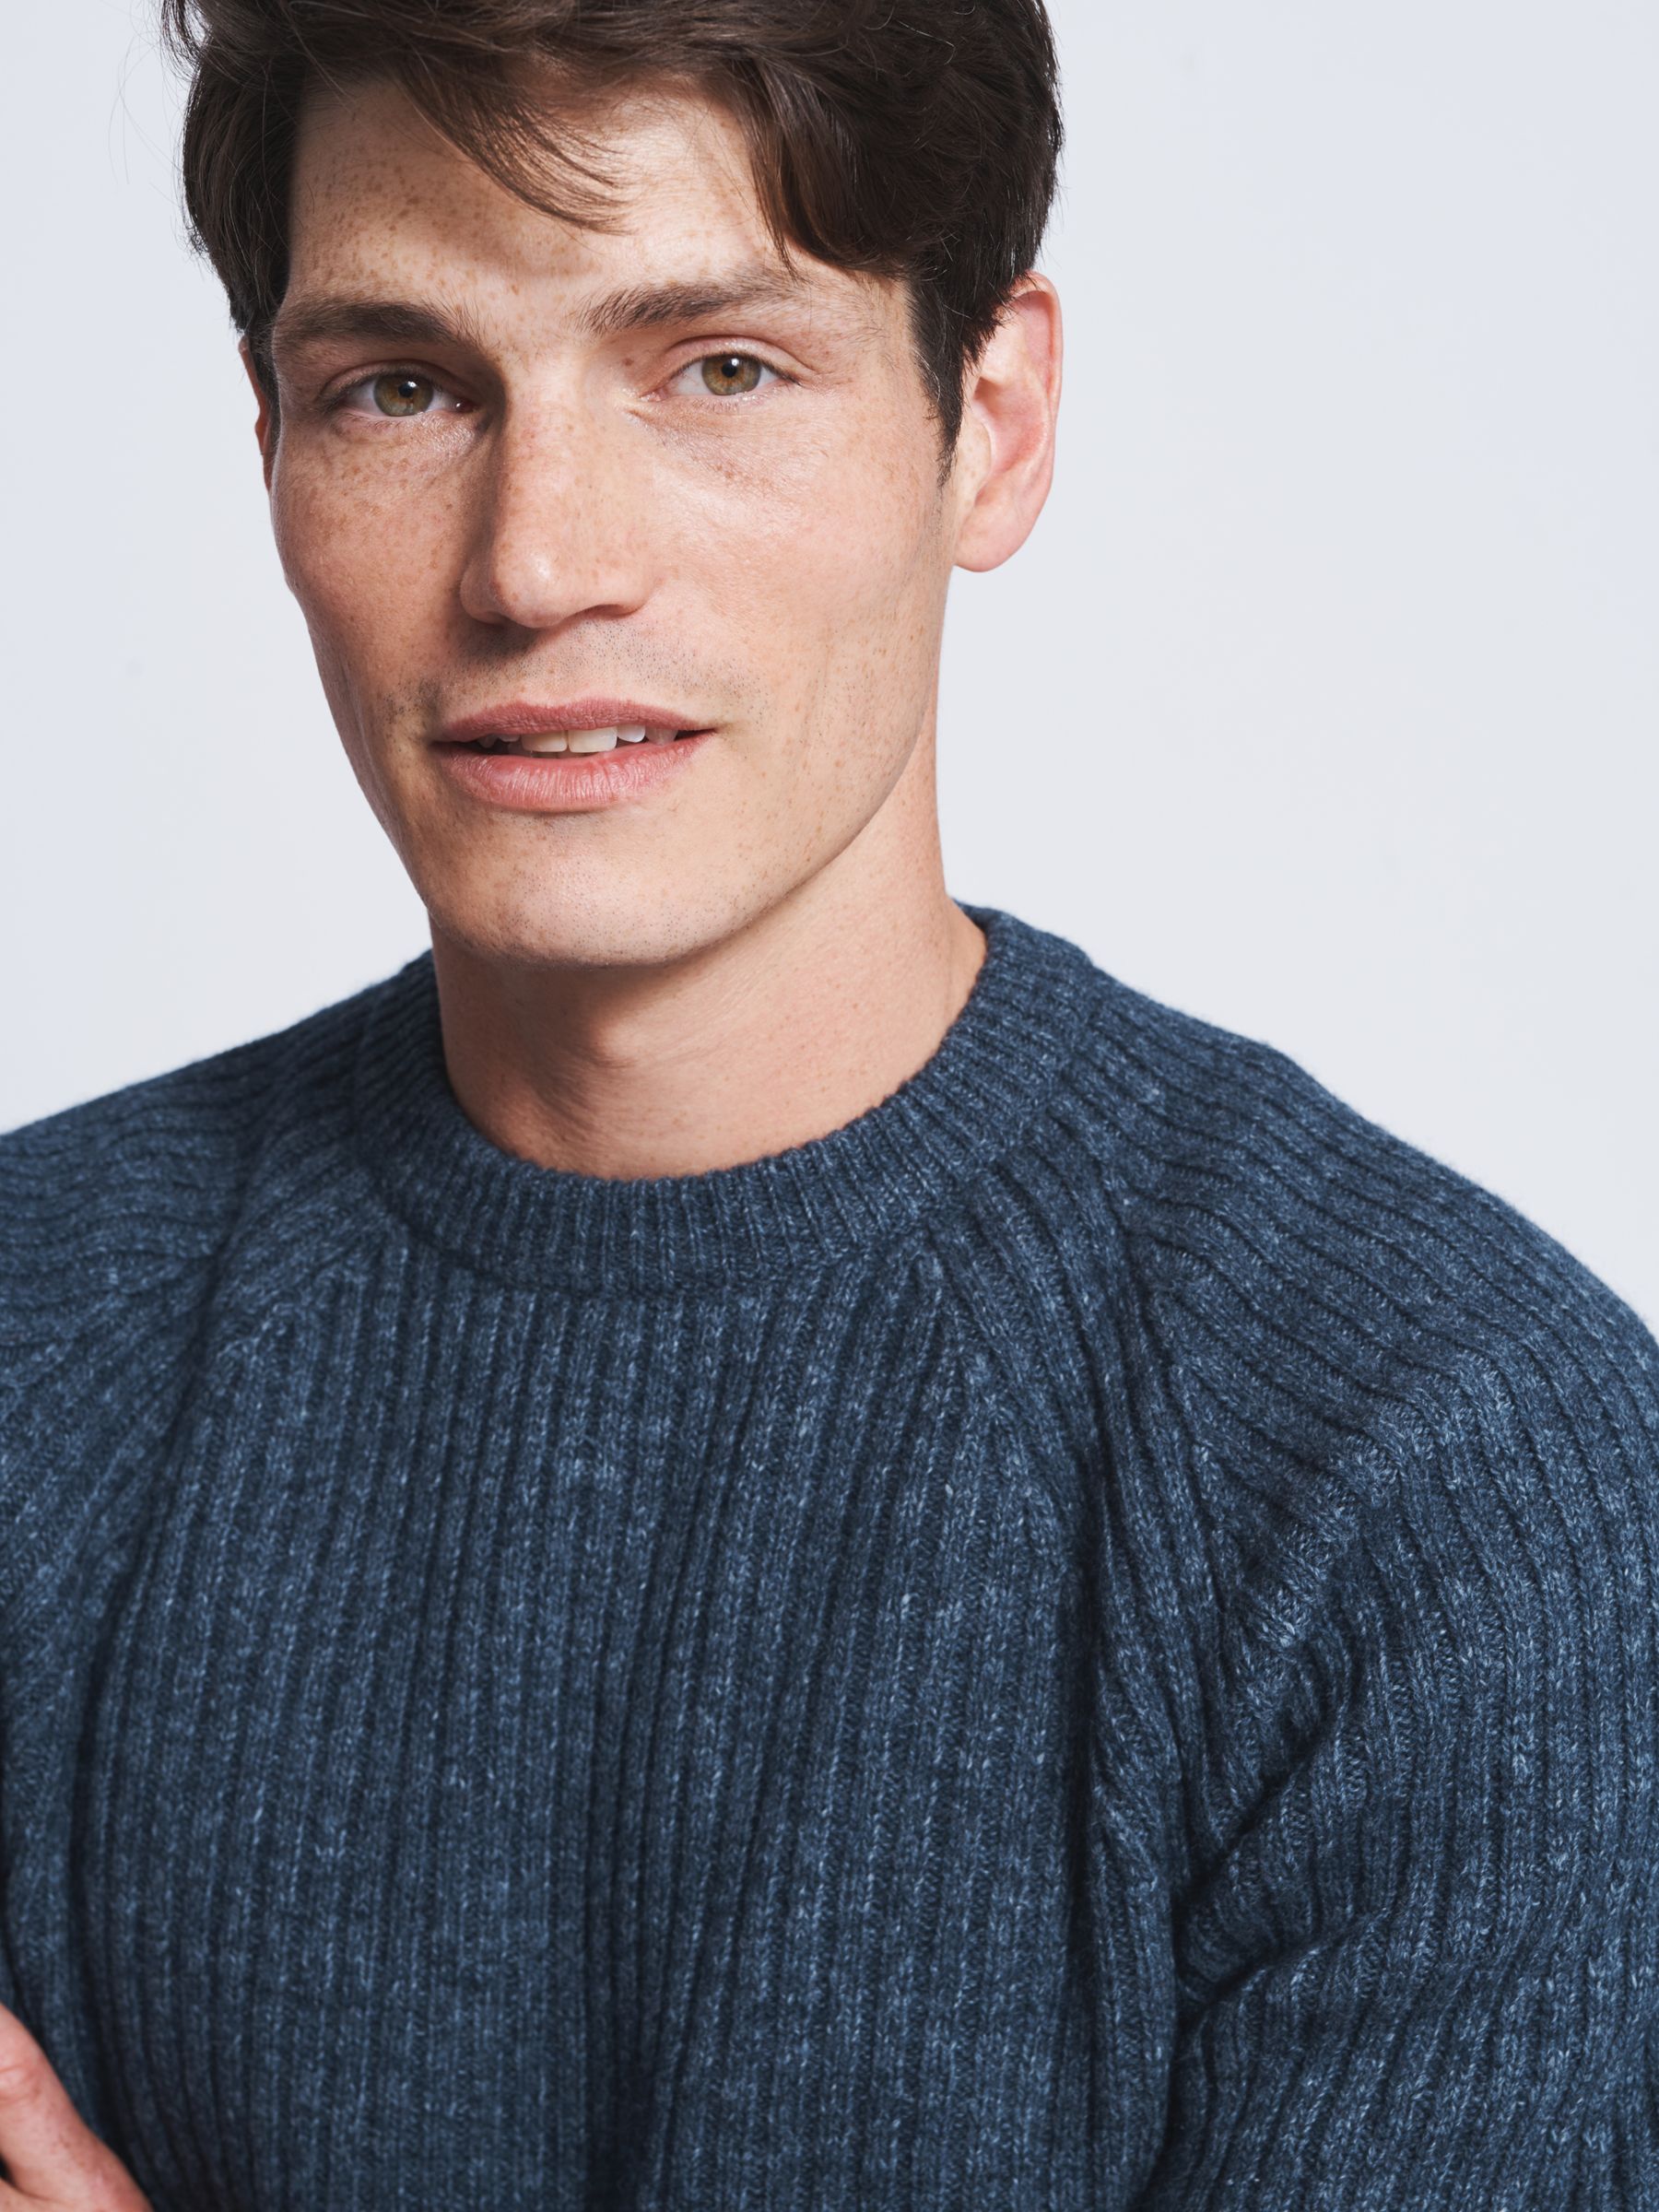 Buy Aubin Tay Ribbed Lambswool Blend Knit Jumper Online at johnlewis.com